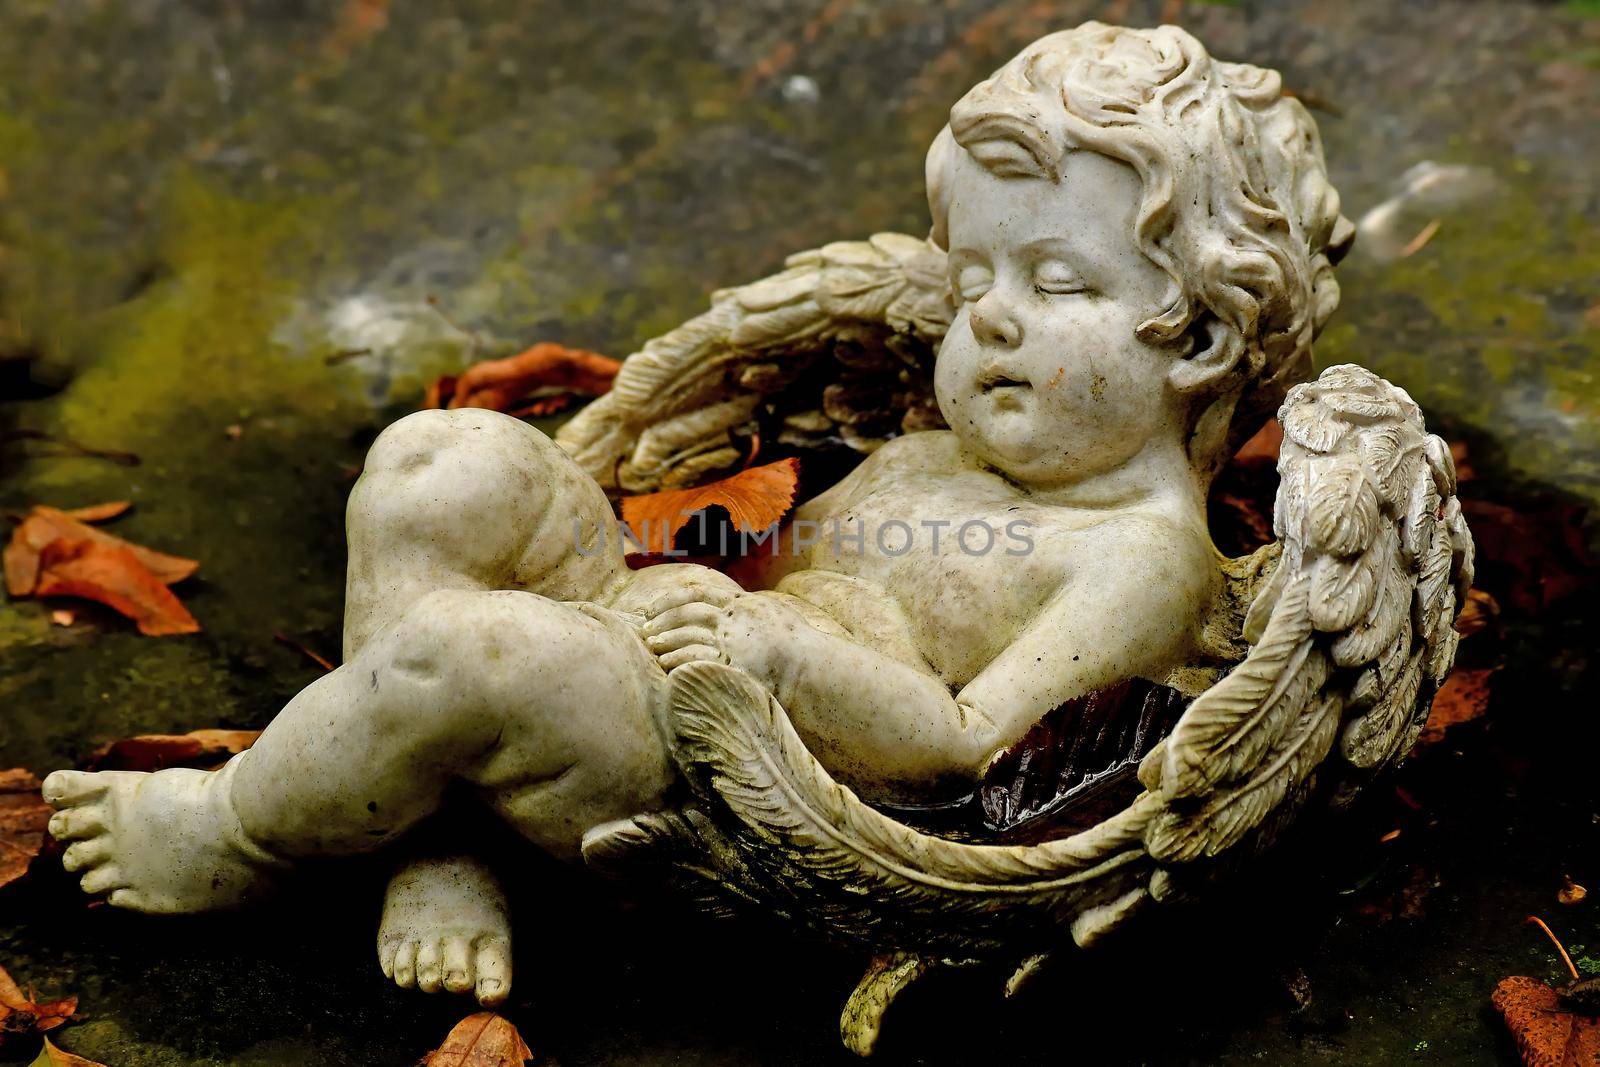 sweet angel figure on a grave in autumn with fallen leaves